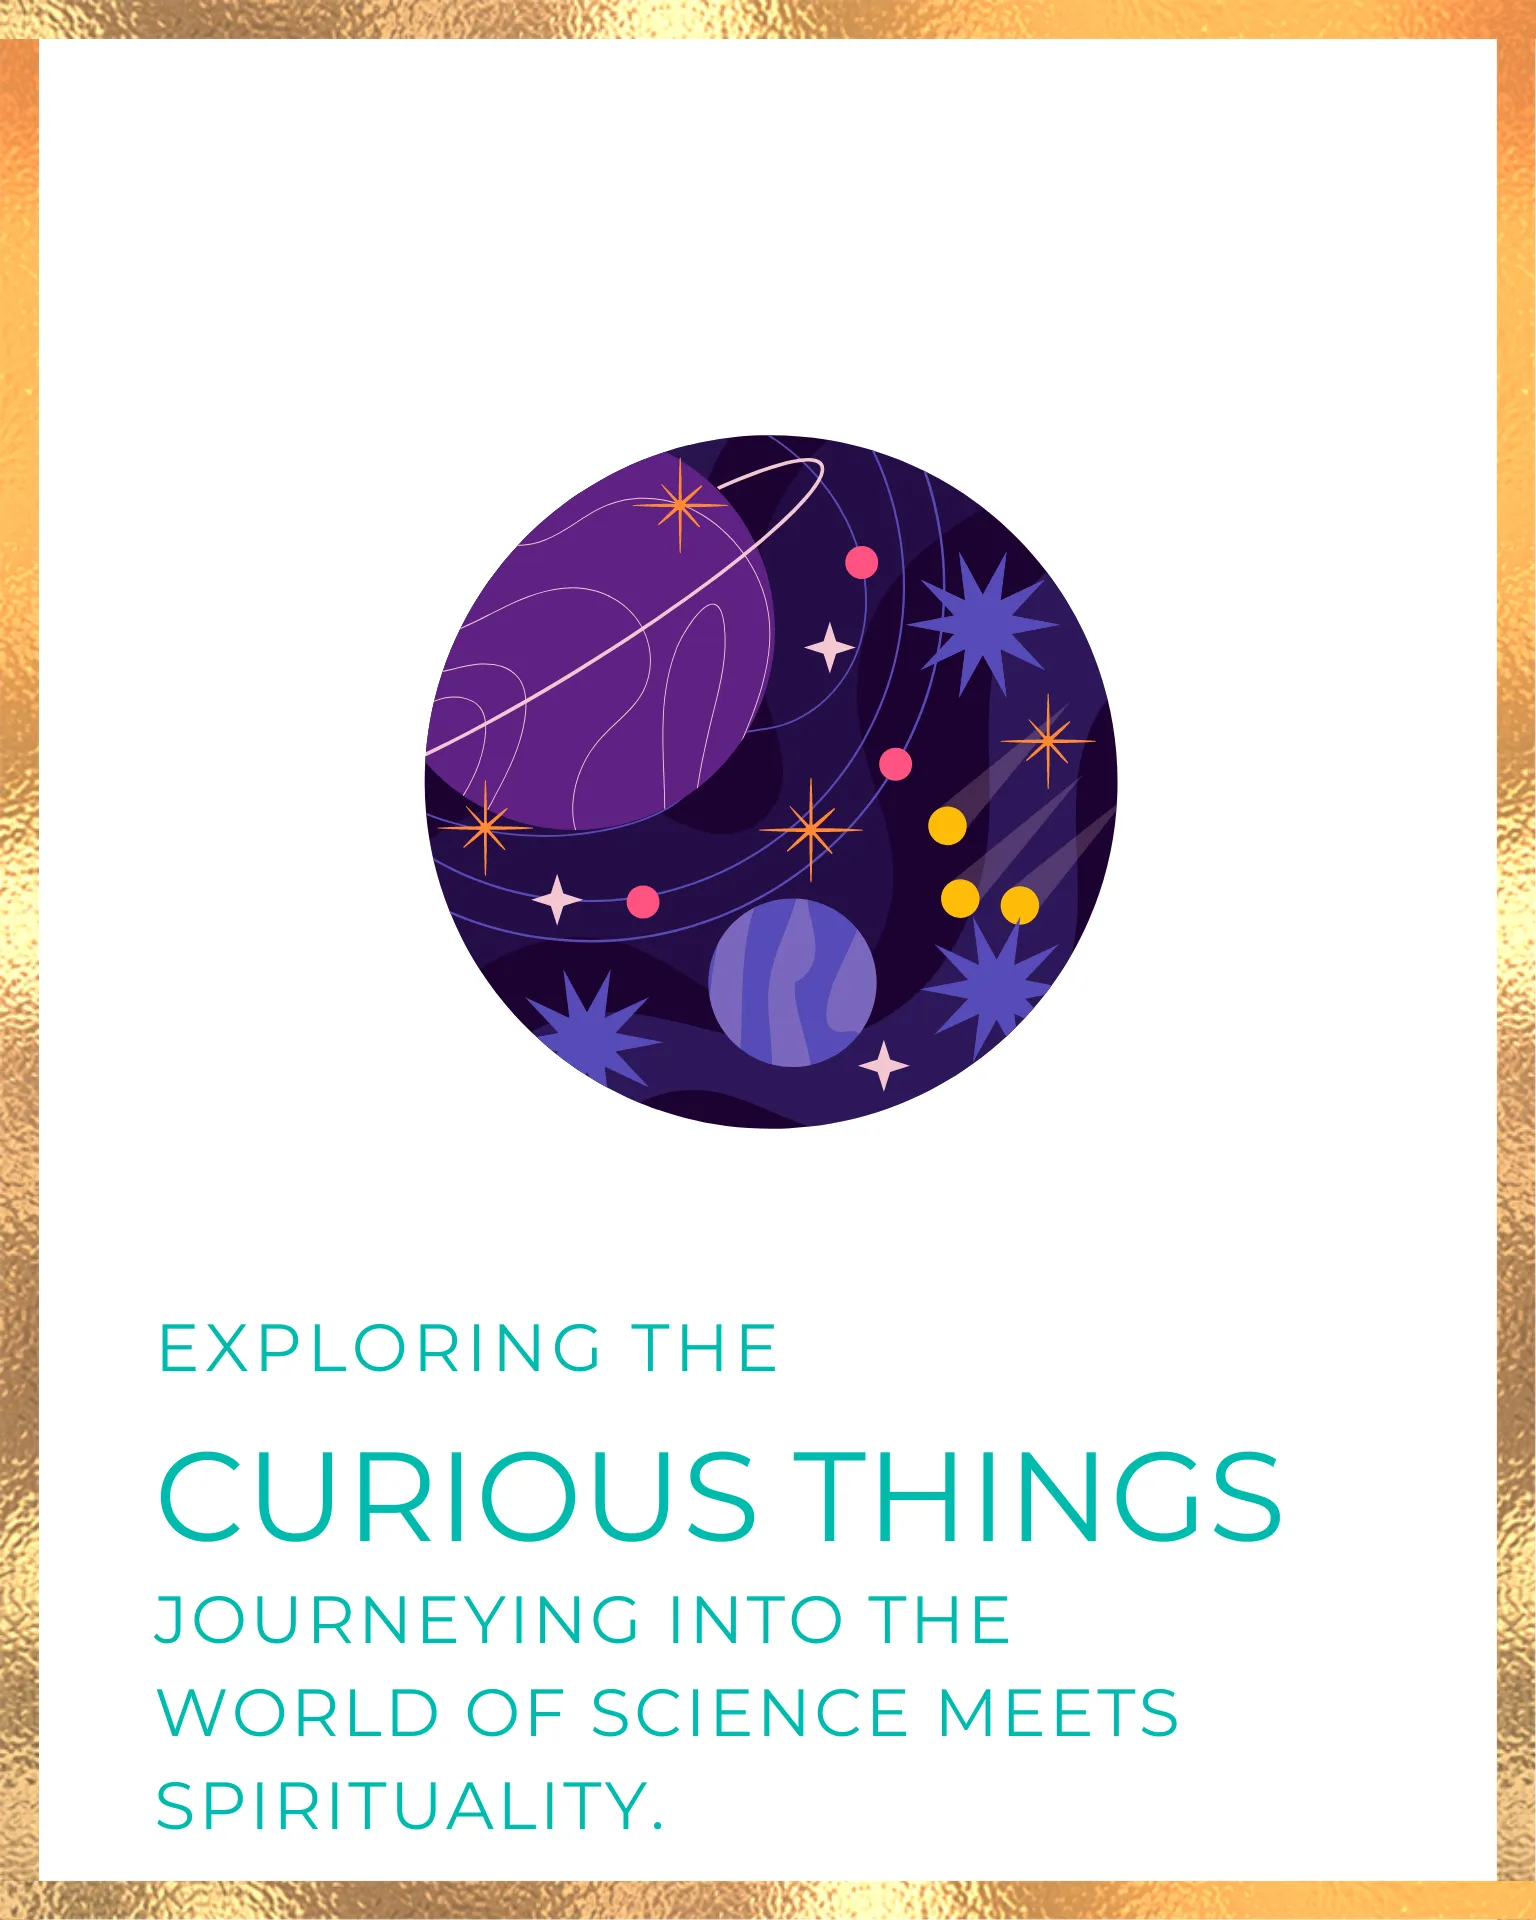 Exploring the curious things: science meets spirituality